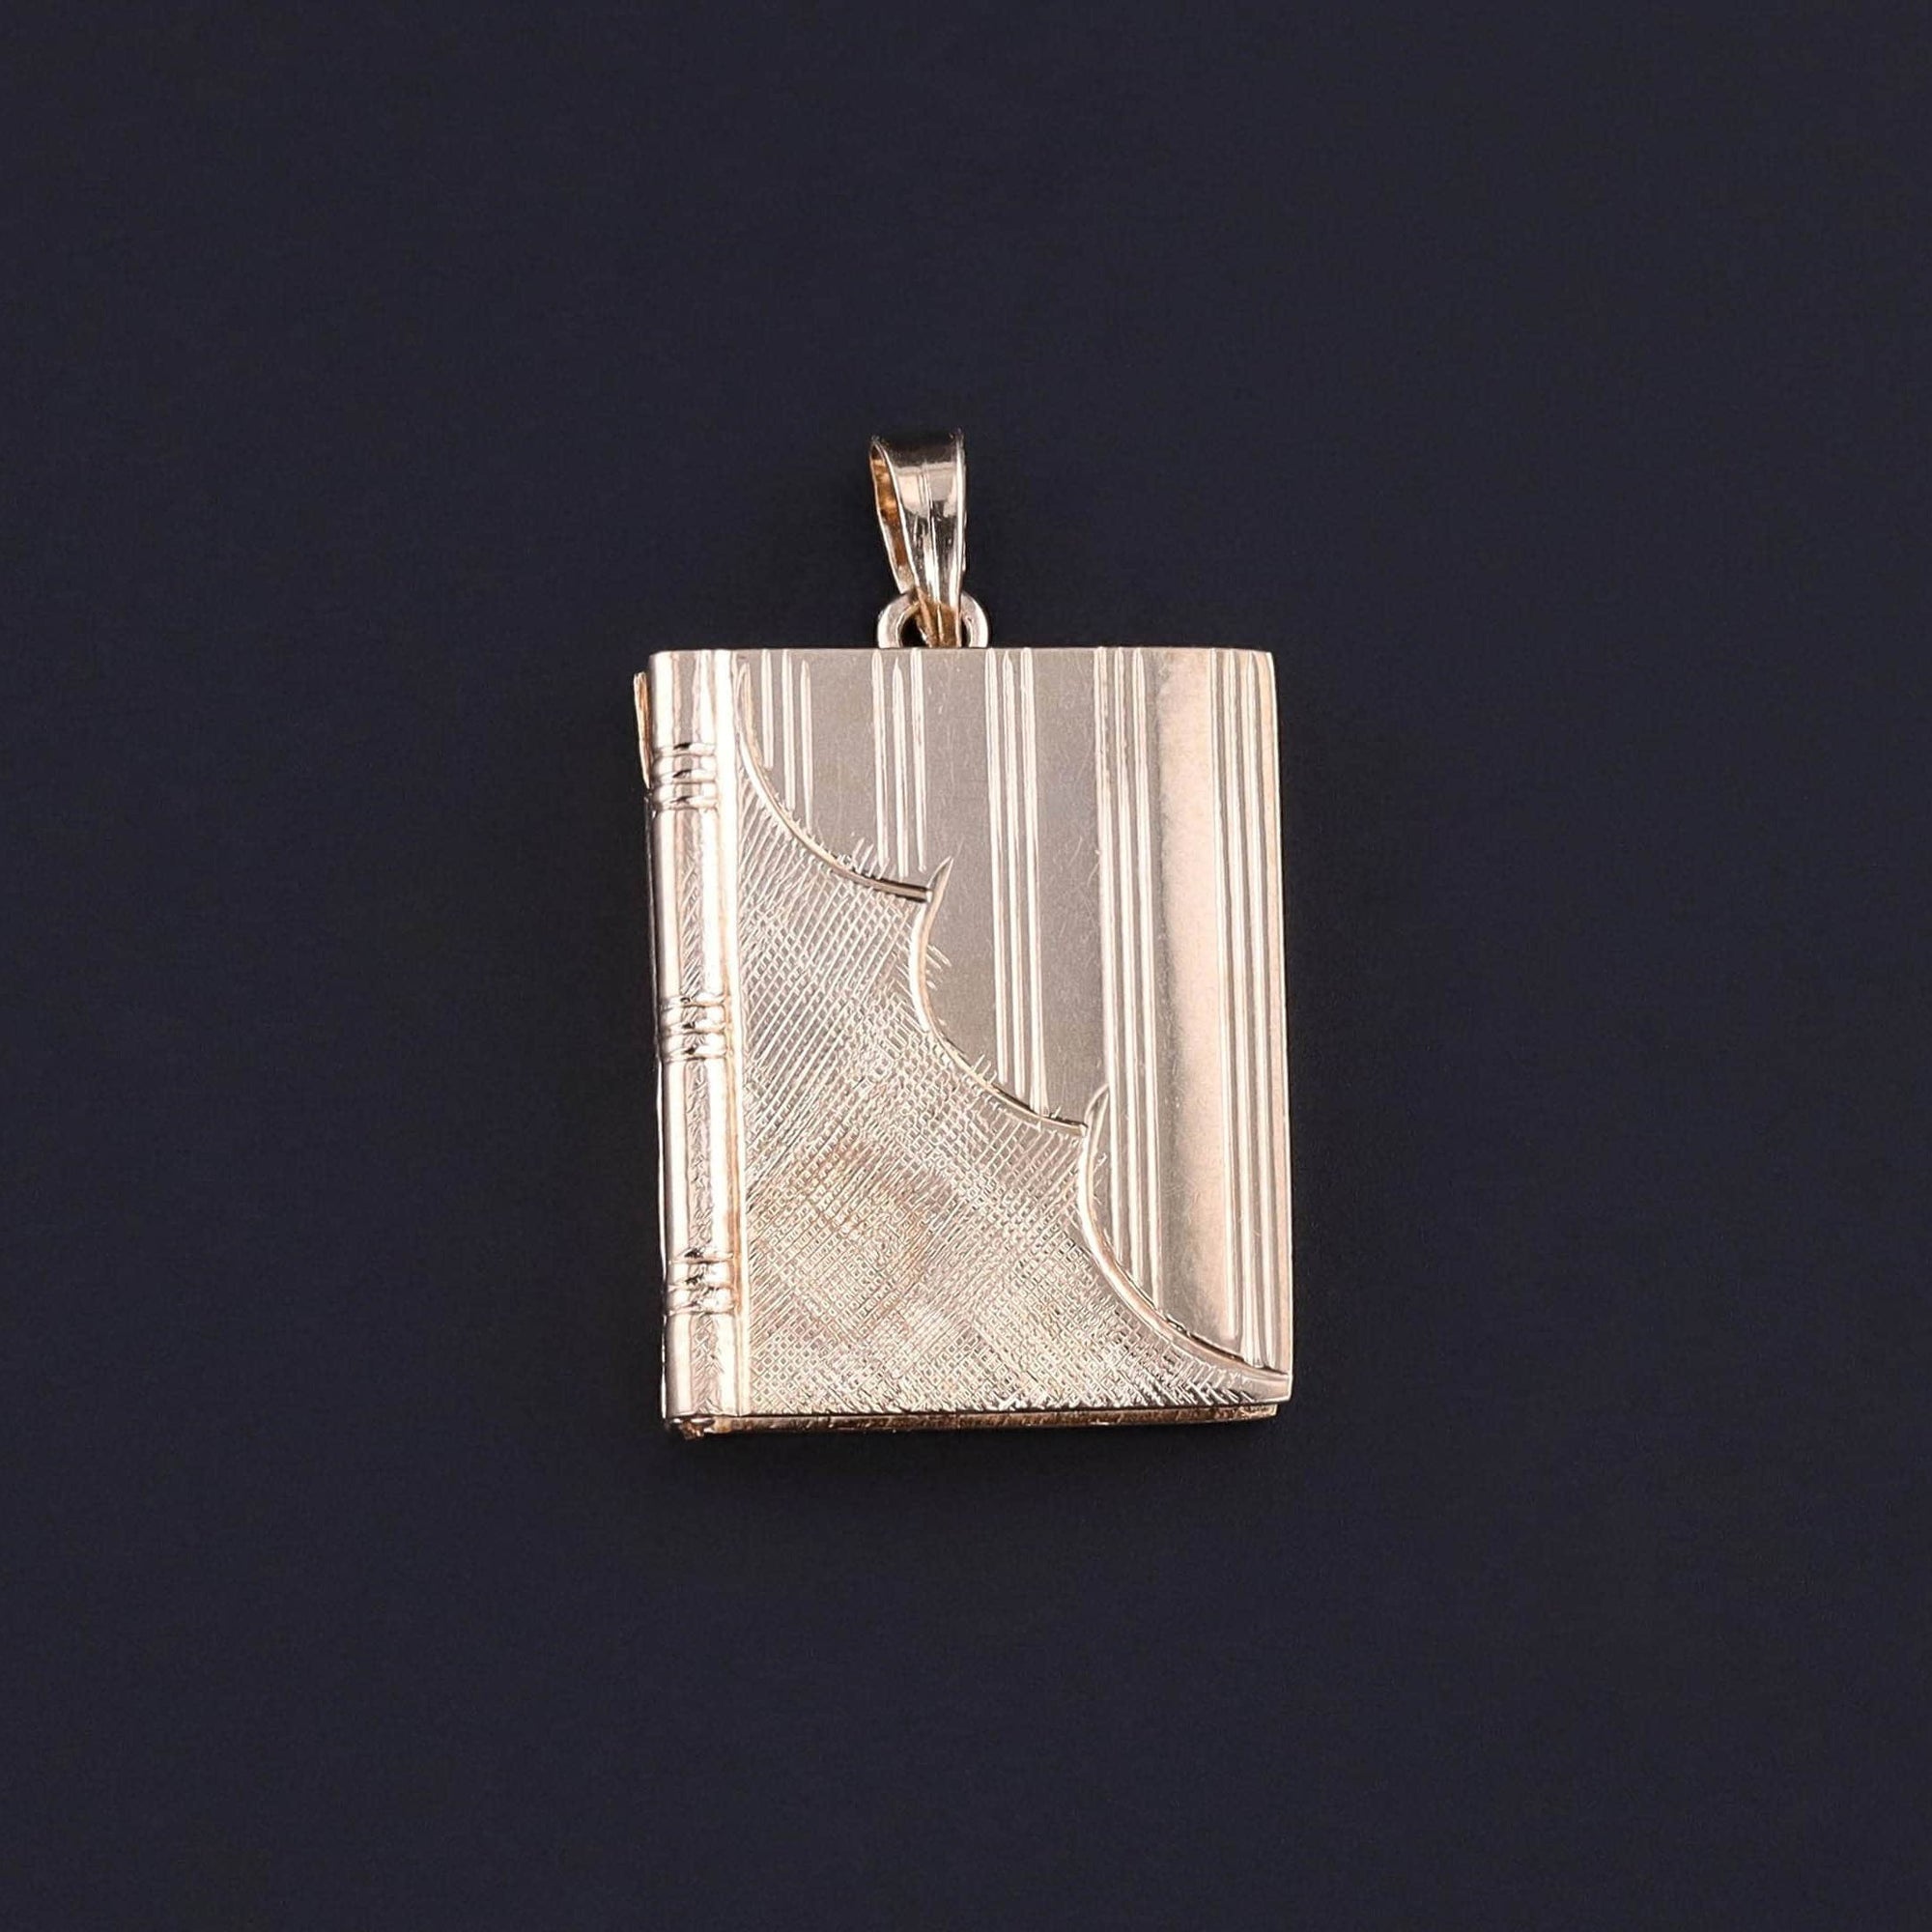 Vintage Book Locket Pendant: Embrace the nostalgia of the 1930s-1940s with this vintage locket, showcasing a hand-engraved book crafted from radiant 14k gold. Perfect for any jewelry collector or vintage jewelry lover.This would be a great keepsake.